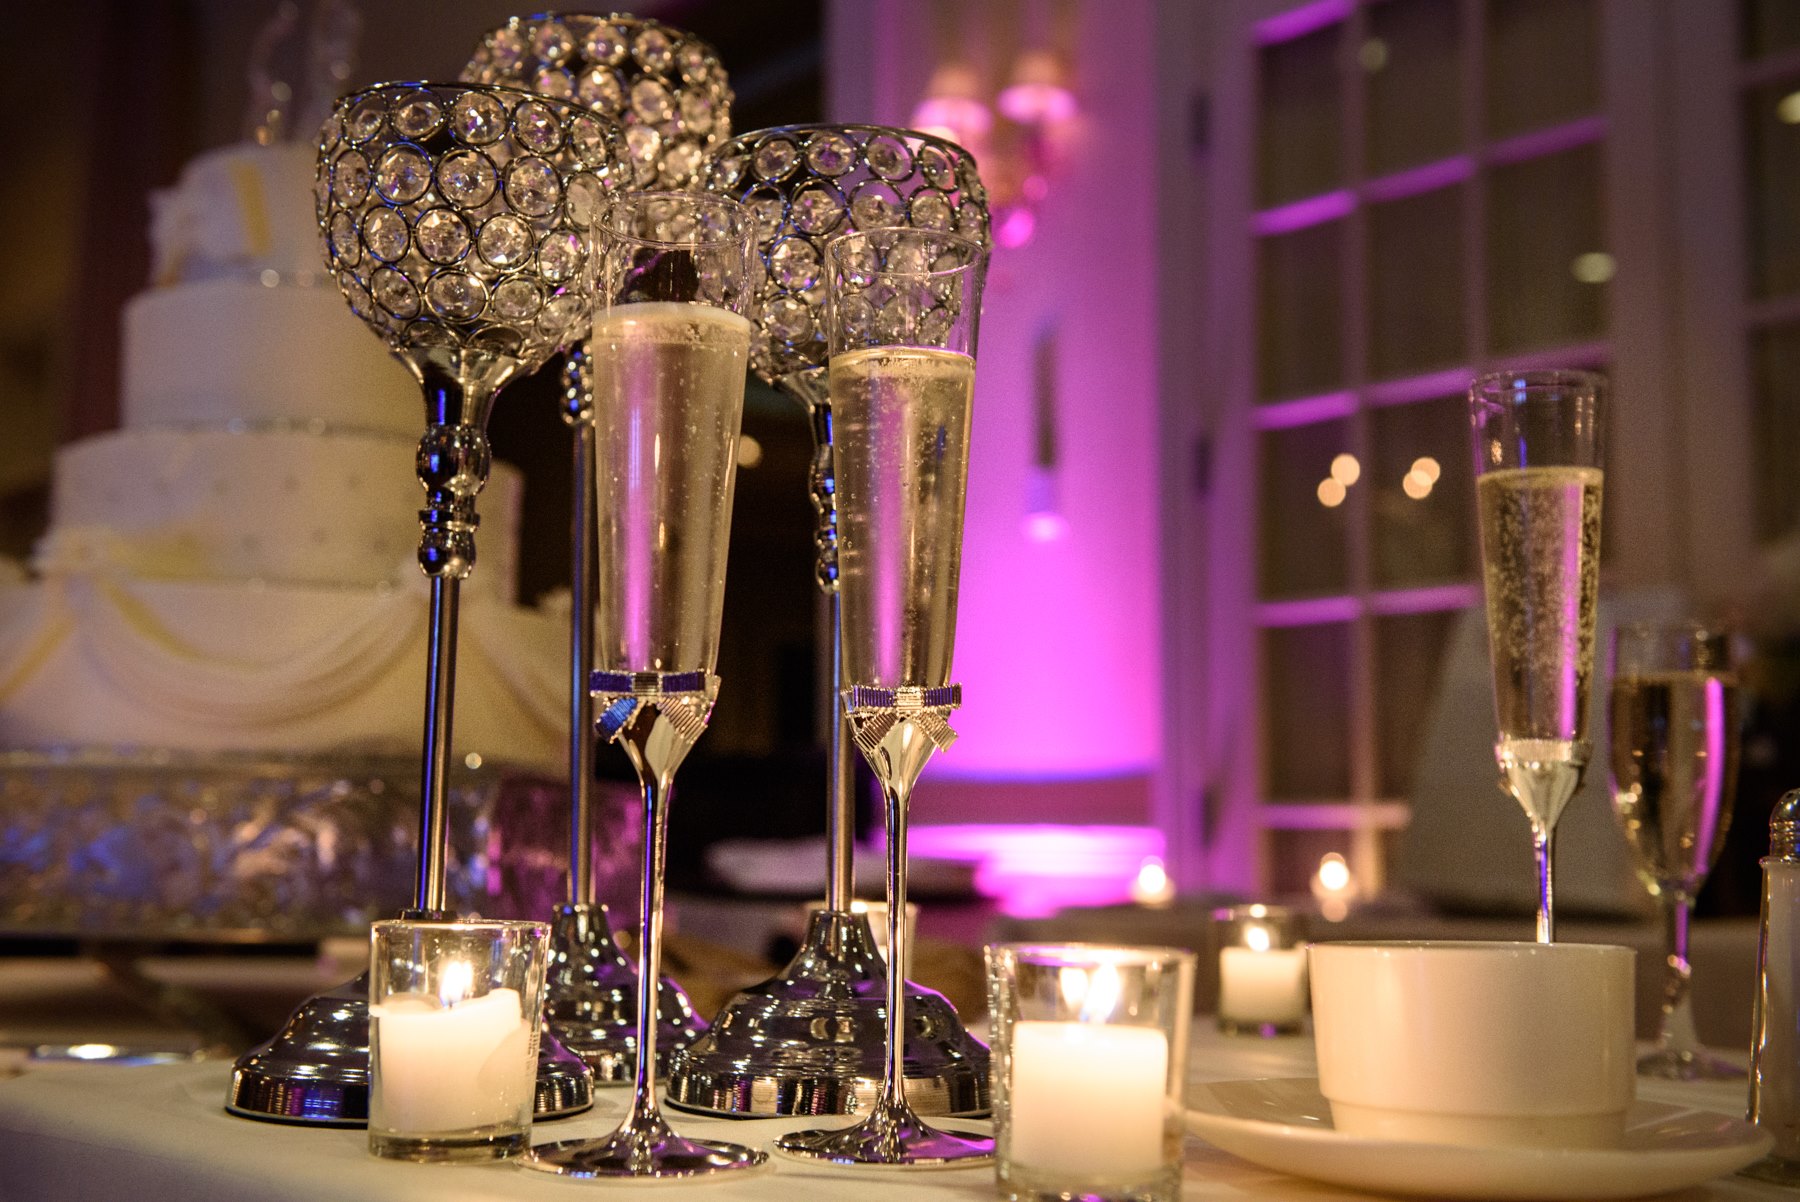 bejeweled-table-setting-at-wedding.jpg